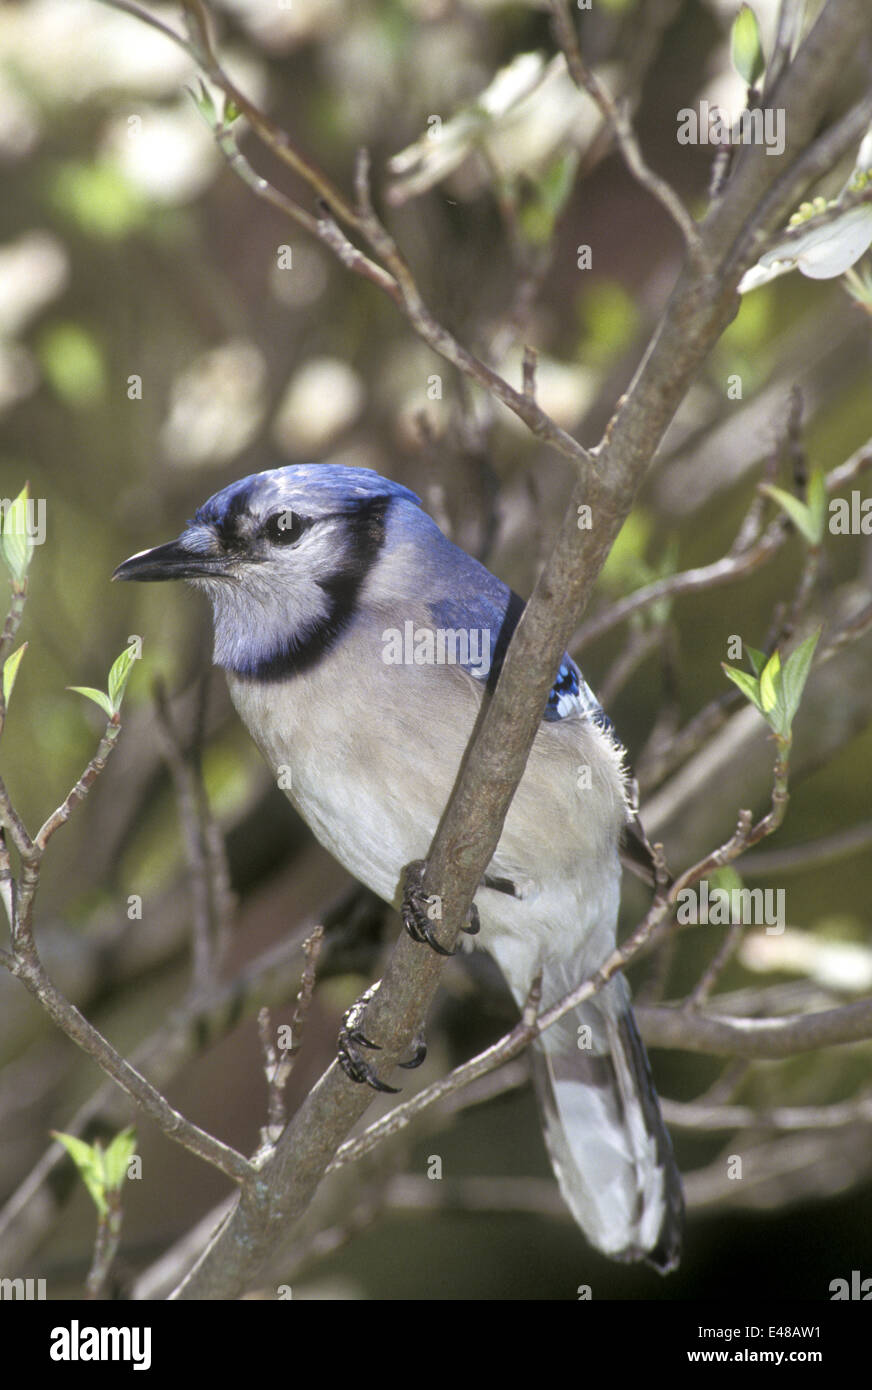 Elegant bluejay, Cyanocitta cristatta, perching on the branch with new spring buds and blooms, Missouri USA Stock Photo